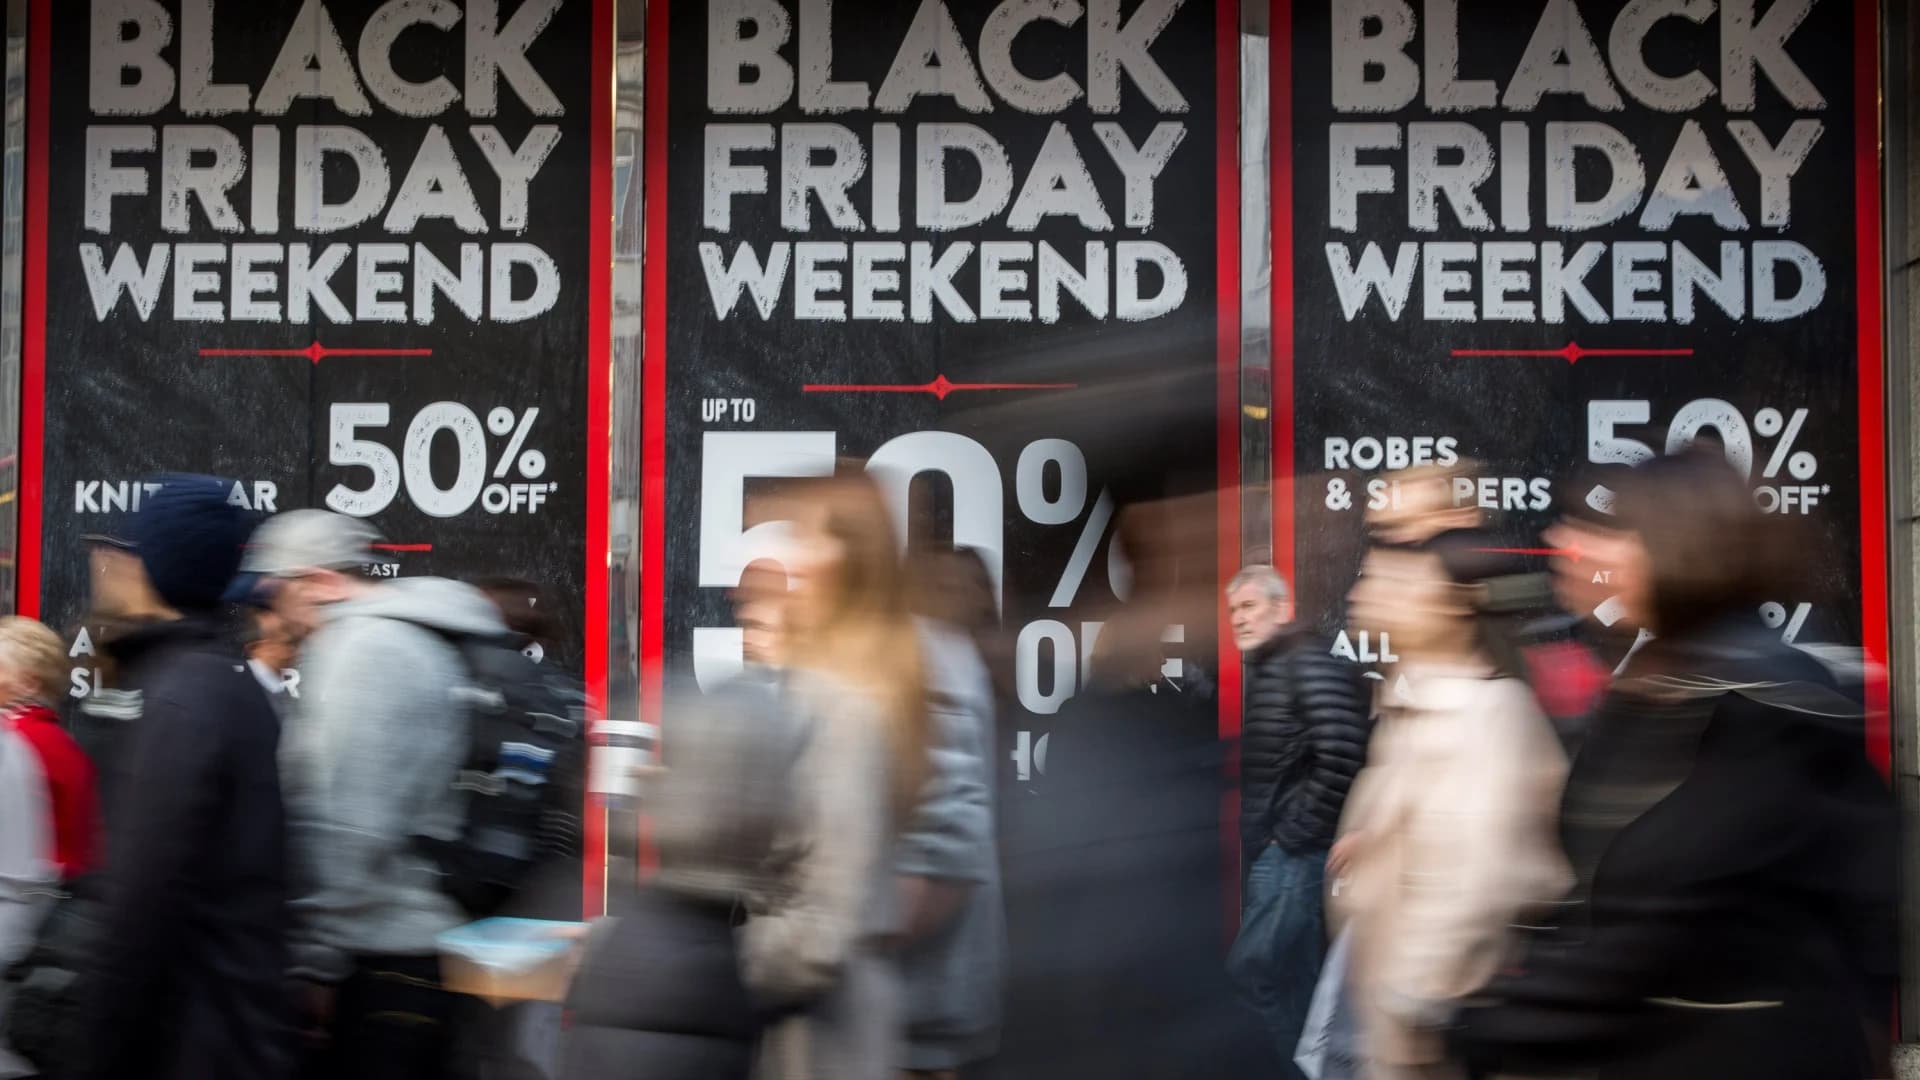 Black Friday Rituals: What's your shopping style?